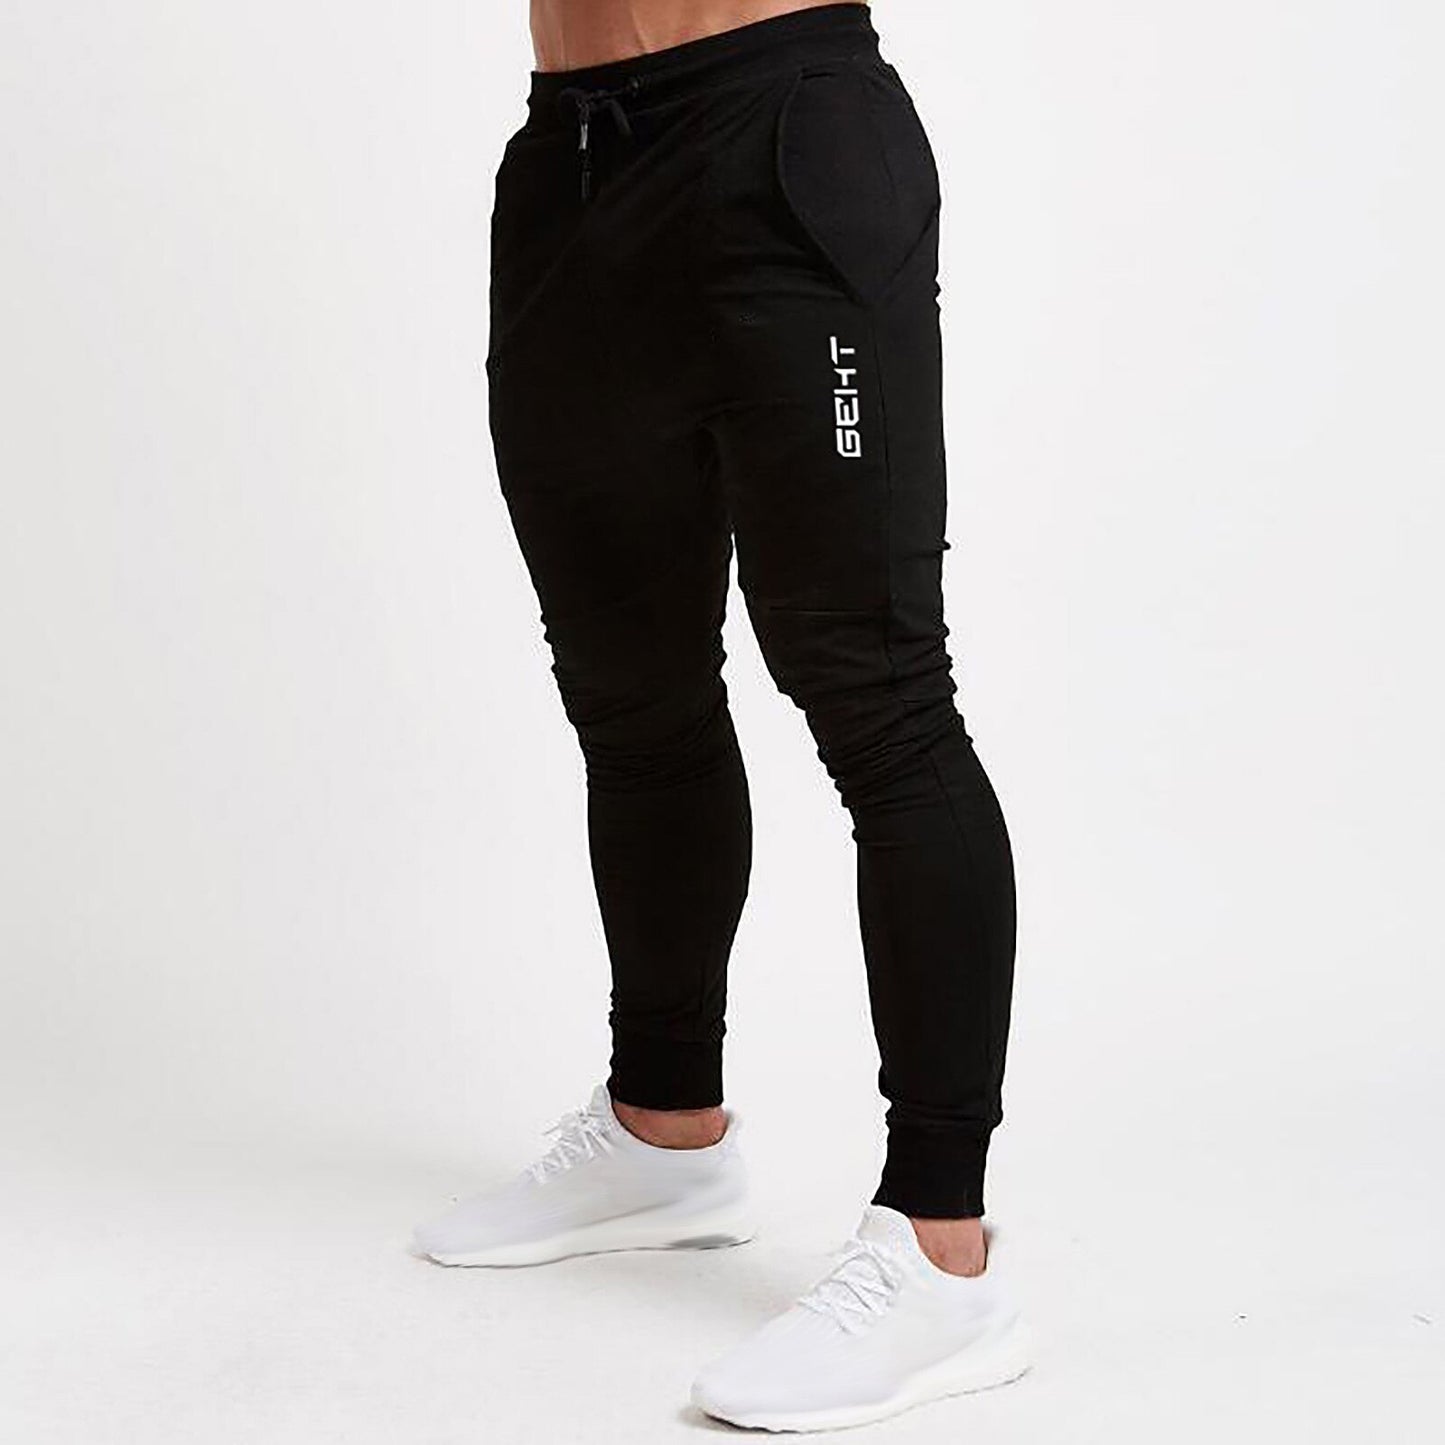 Men's Fitness and Leisure Skinny Trousers